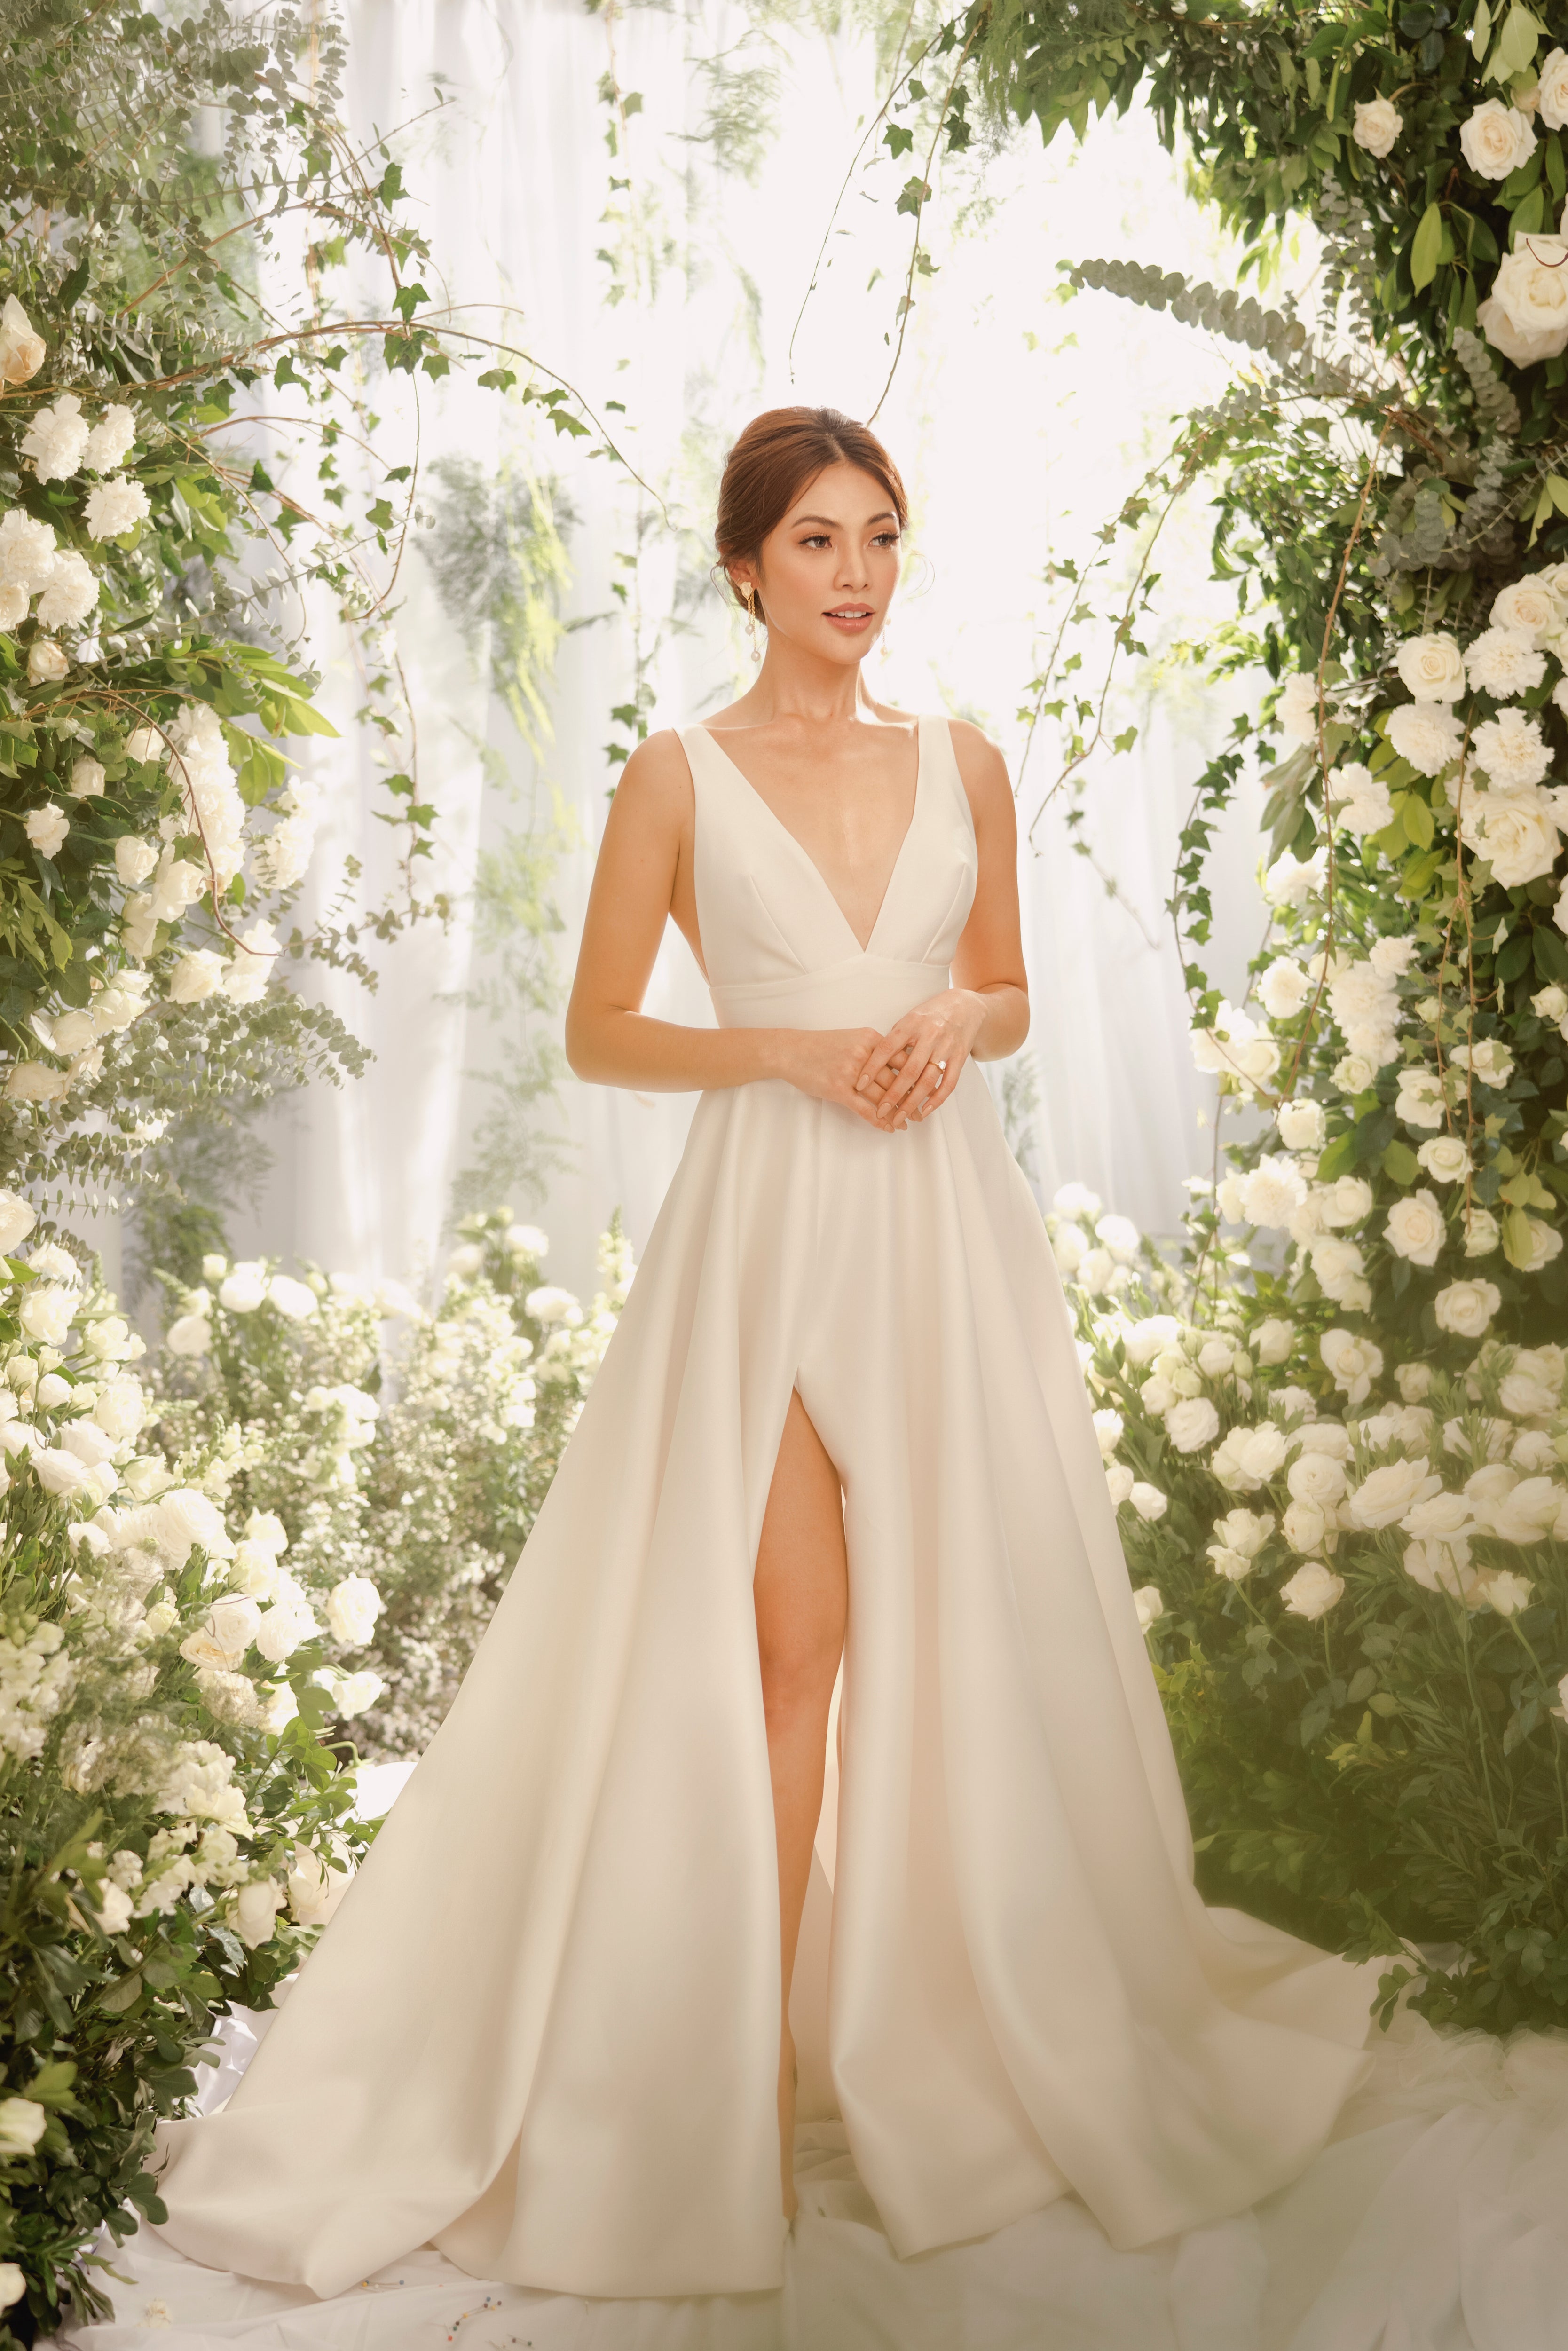 RTW Dresses For Your Entourage At P2,000 | Bridal Book FN